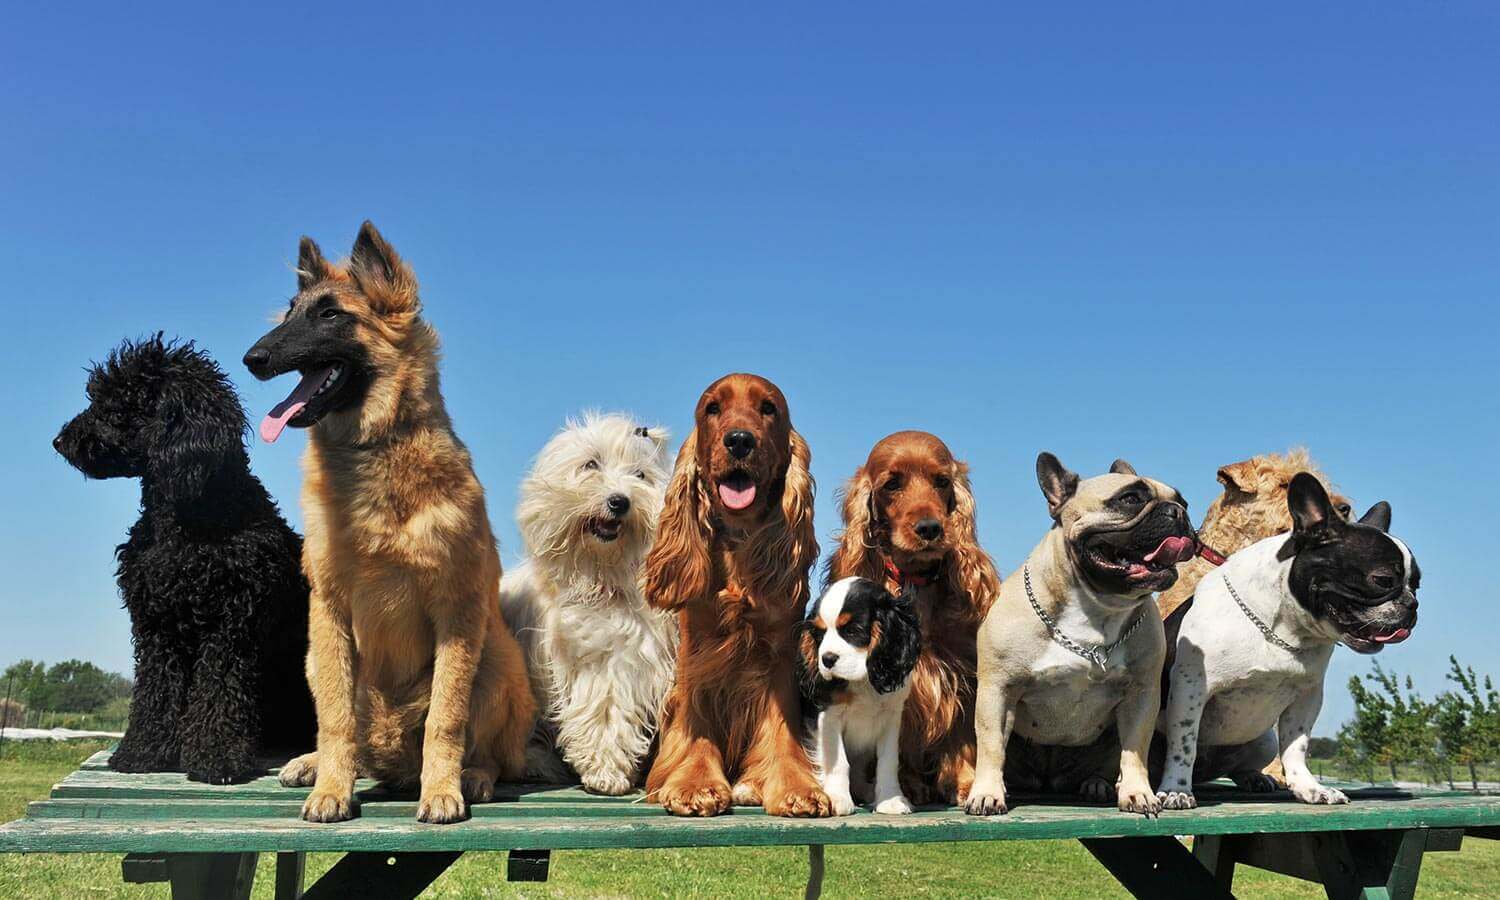 A pack of dogs on a bench